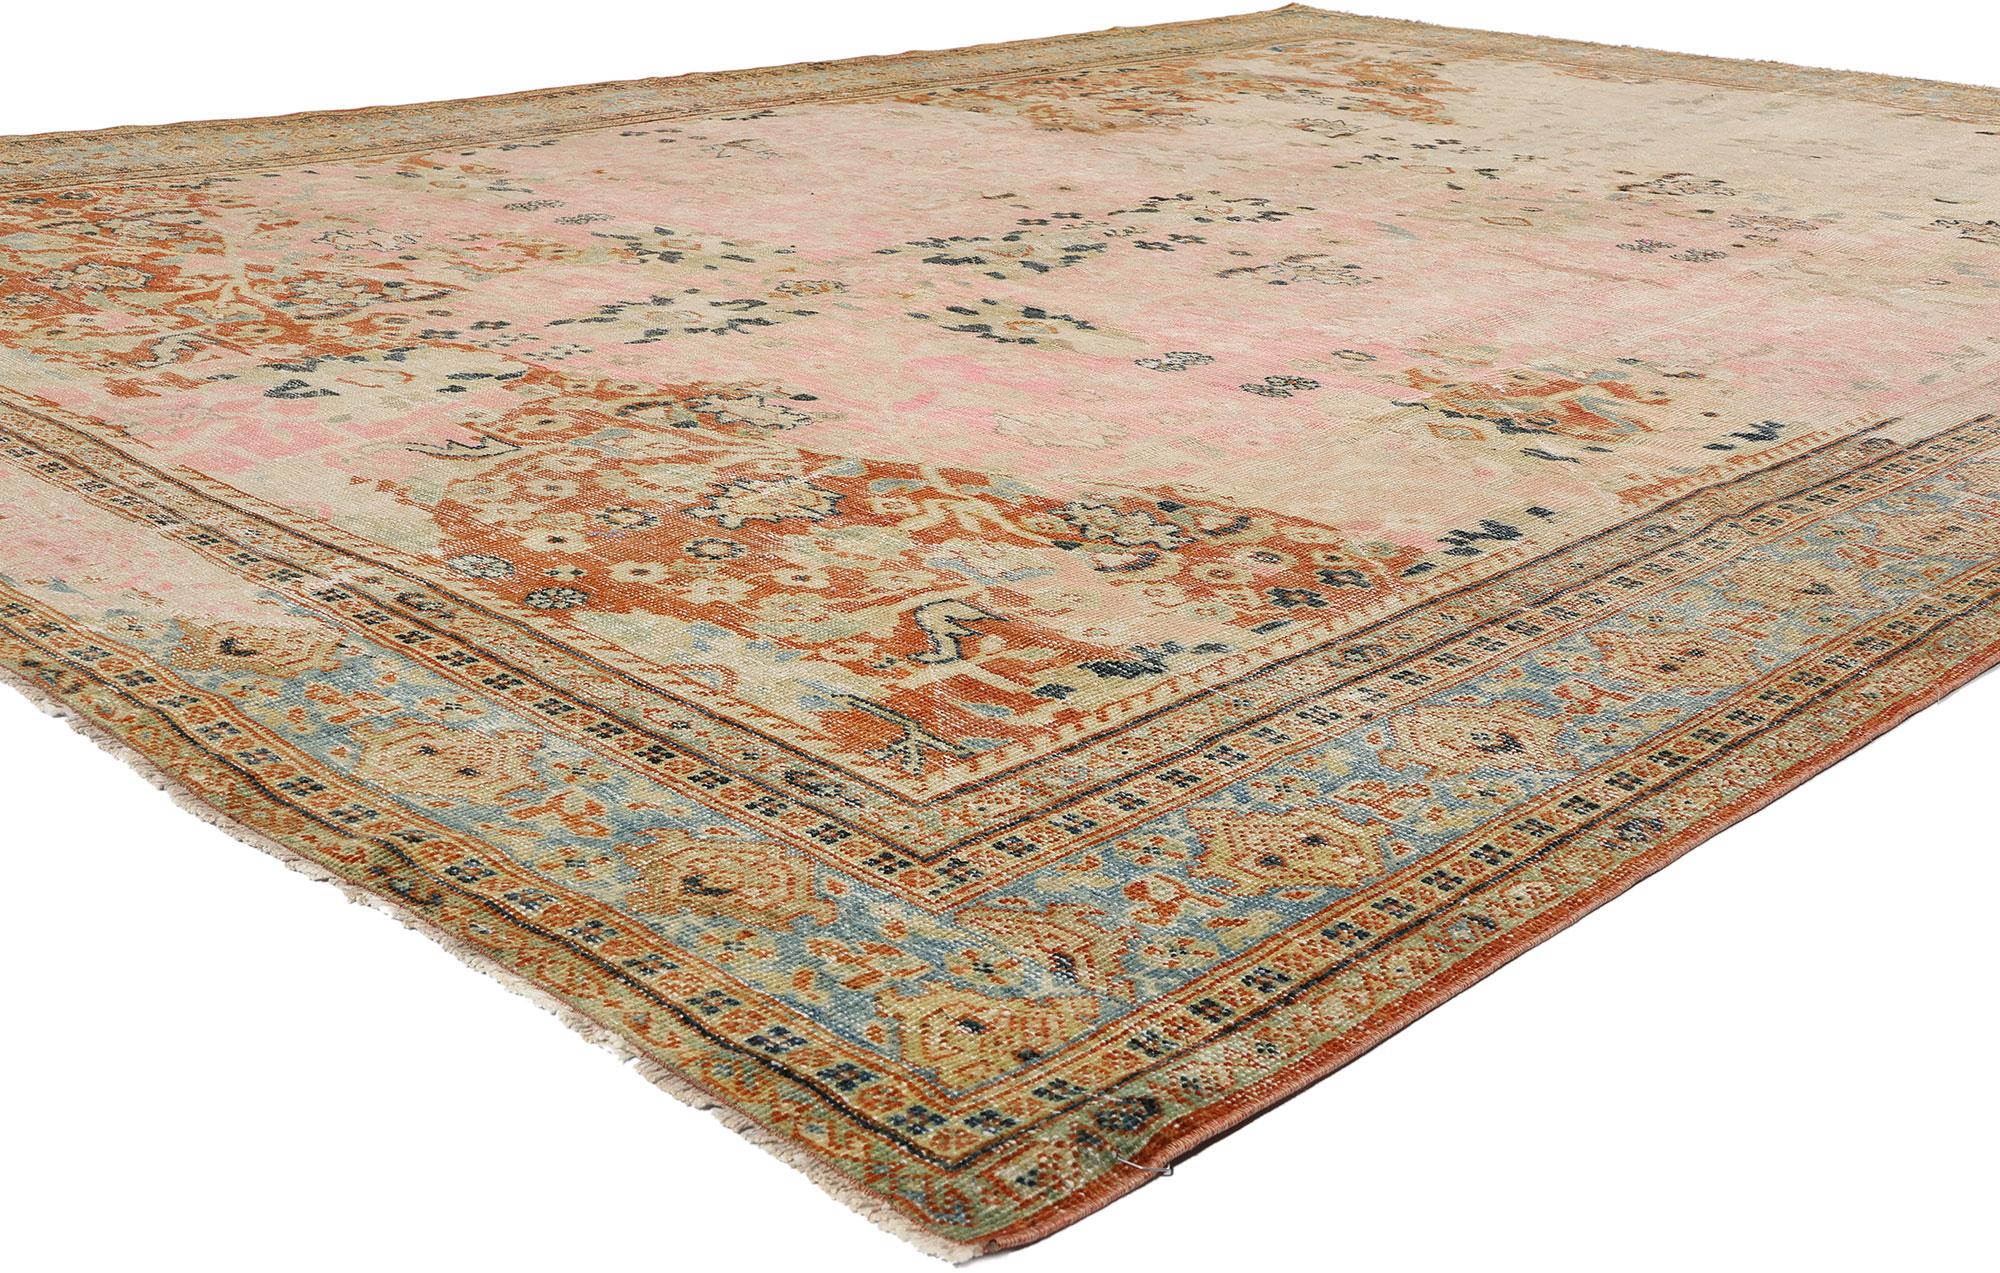 53910 Distressed Antique Pink Persian Sultanabad Rug, 08'06 x 11'11. Antique-washed Persian Sultanabad rugs are rugs treated with a special washing process to impart an aged and antiquated appearance, originating from Iran's Sultanabad region,